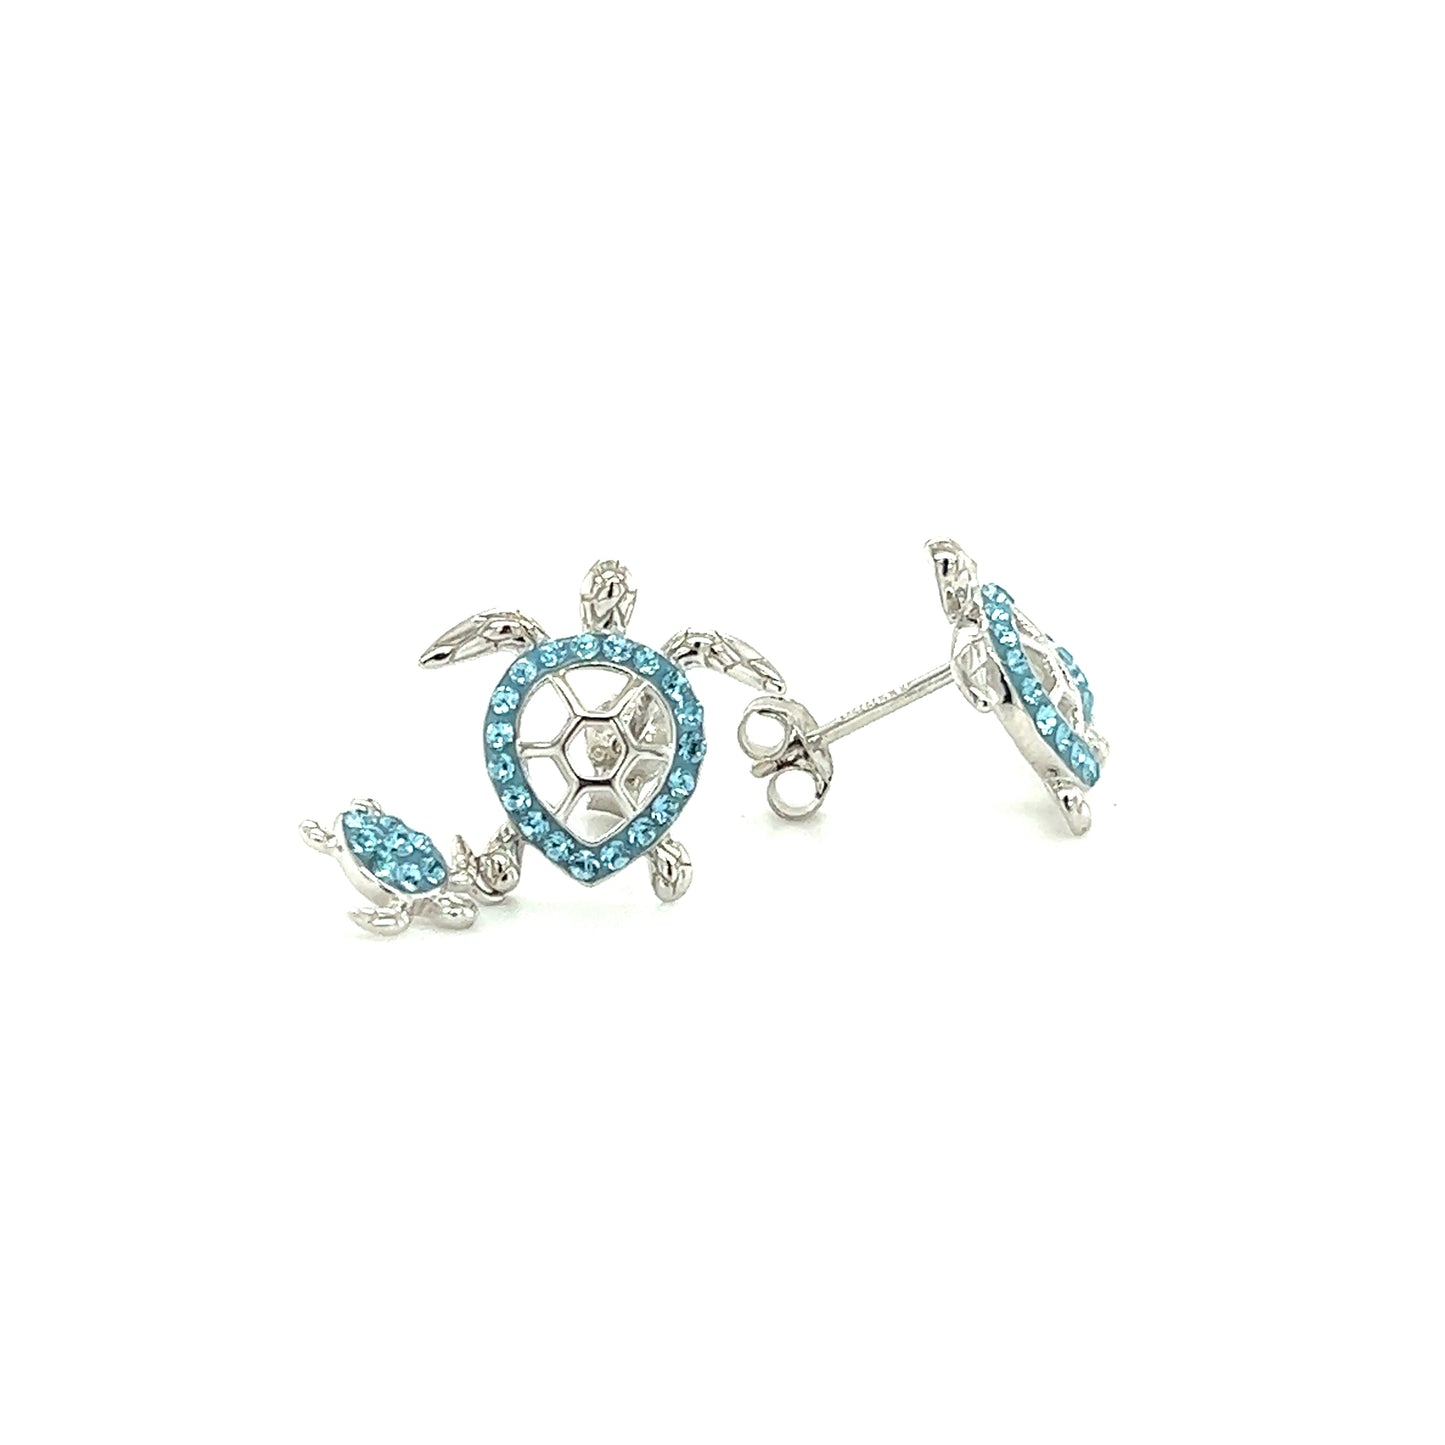 Mother and Baby Sea Turtle Earrings with Aqua Crystals in Sterling Silver Front and Side View